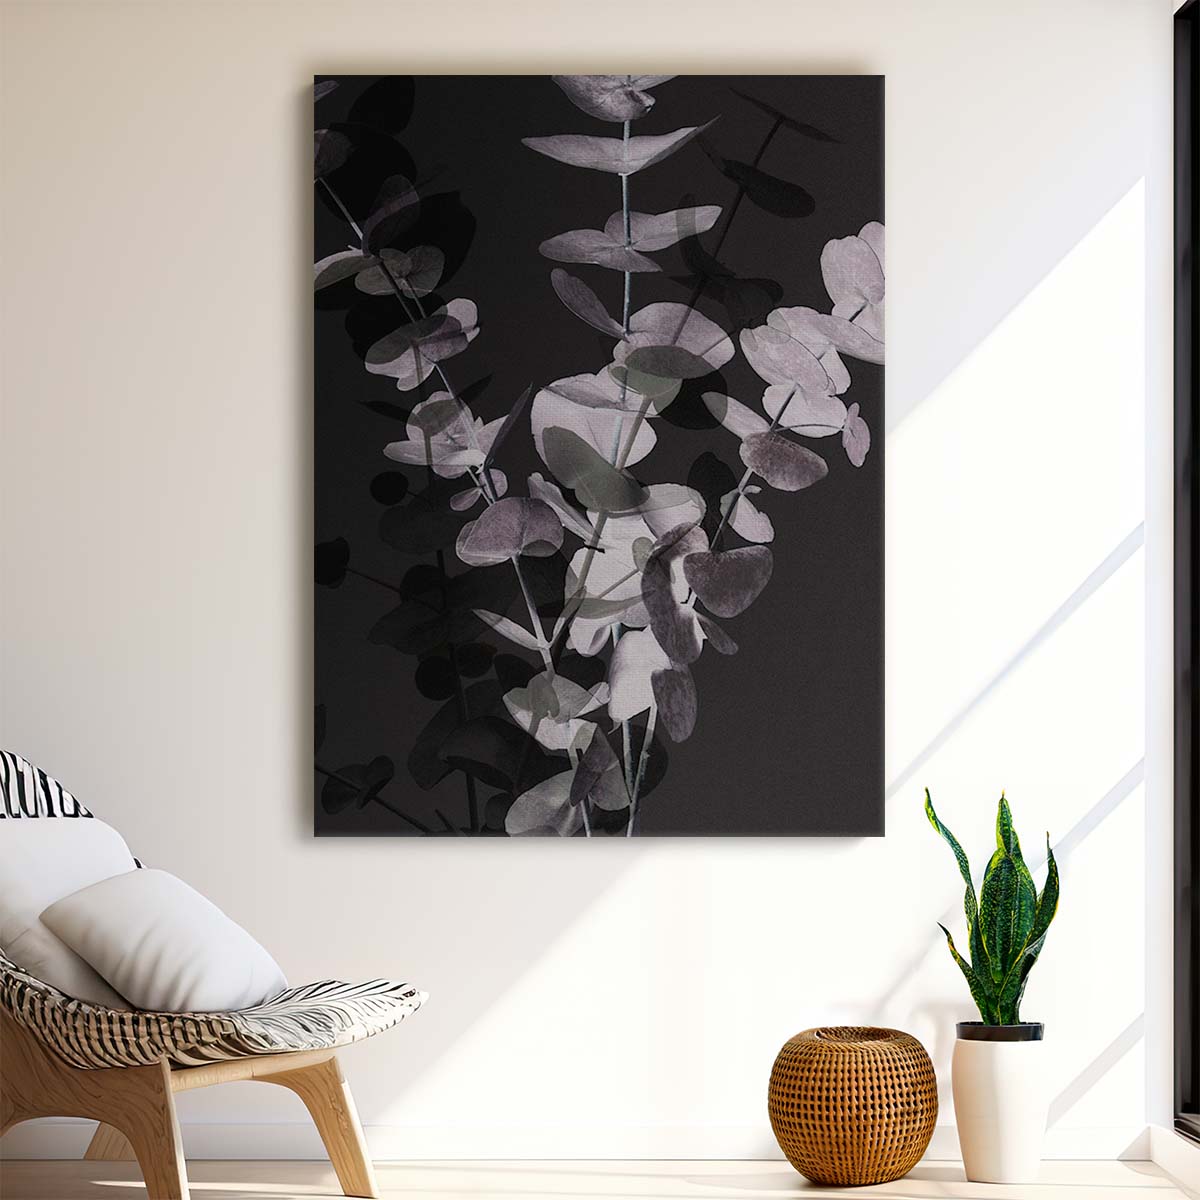 Eucalyptus Botanical Photography with Dark Abstract Texture by Luxuriance Designs, made in USA